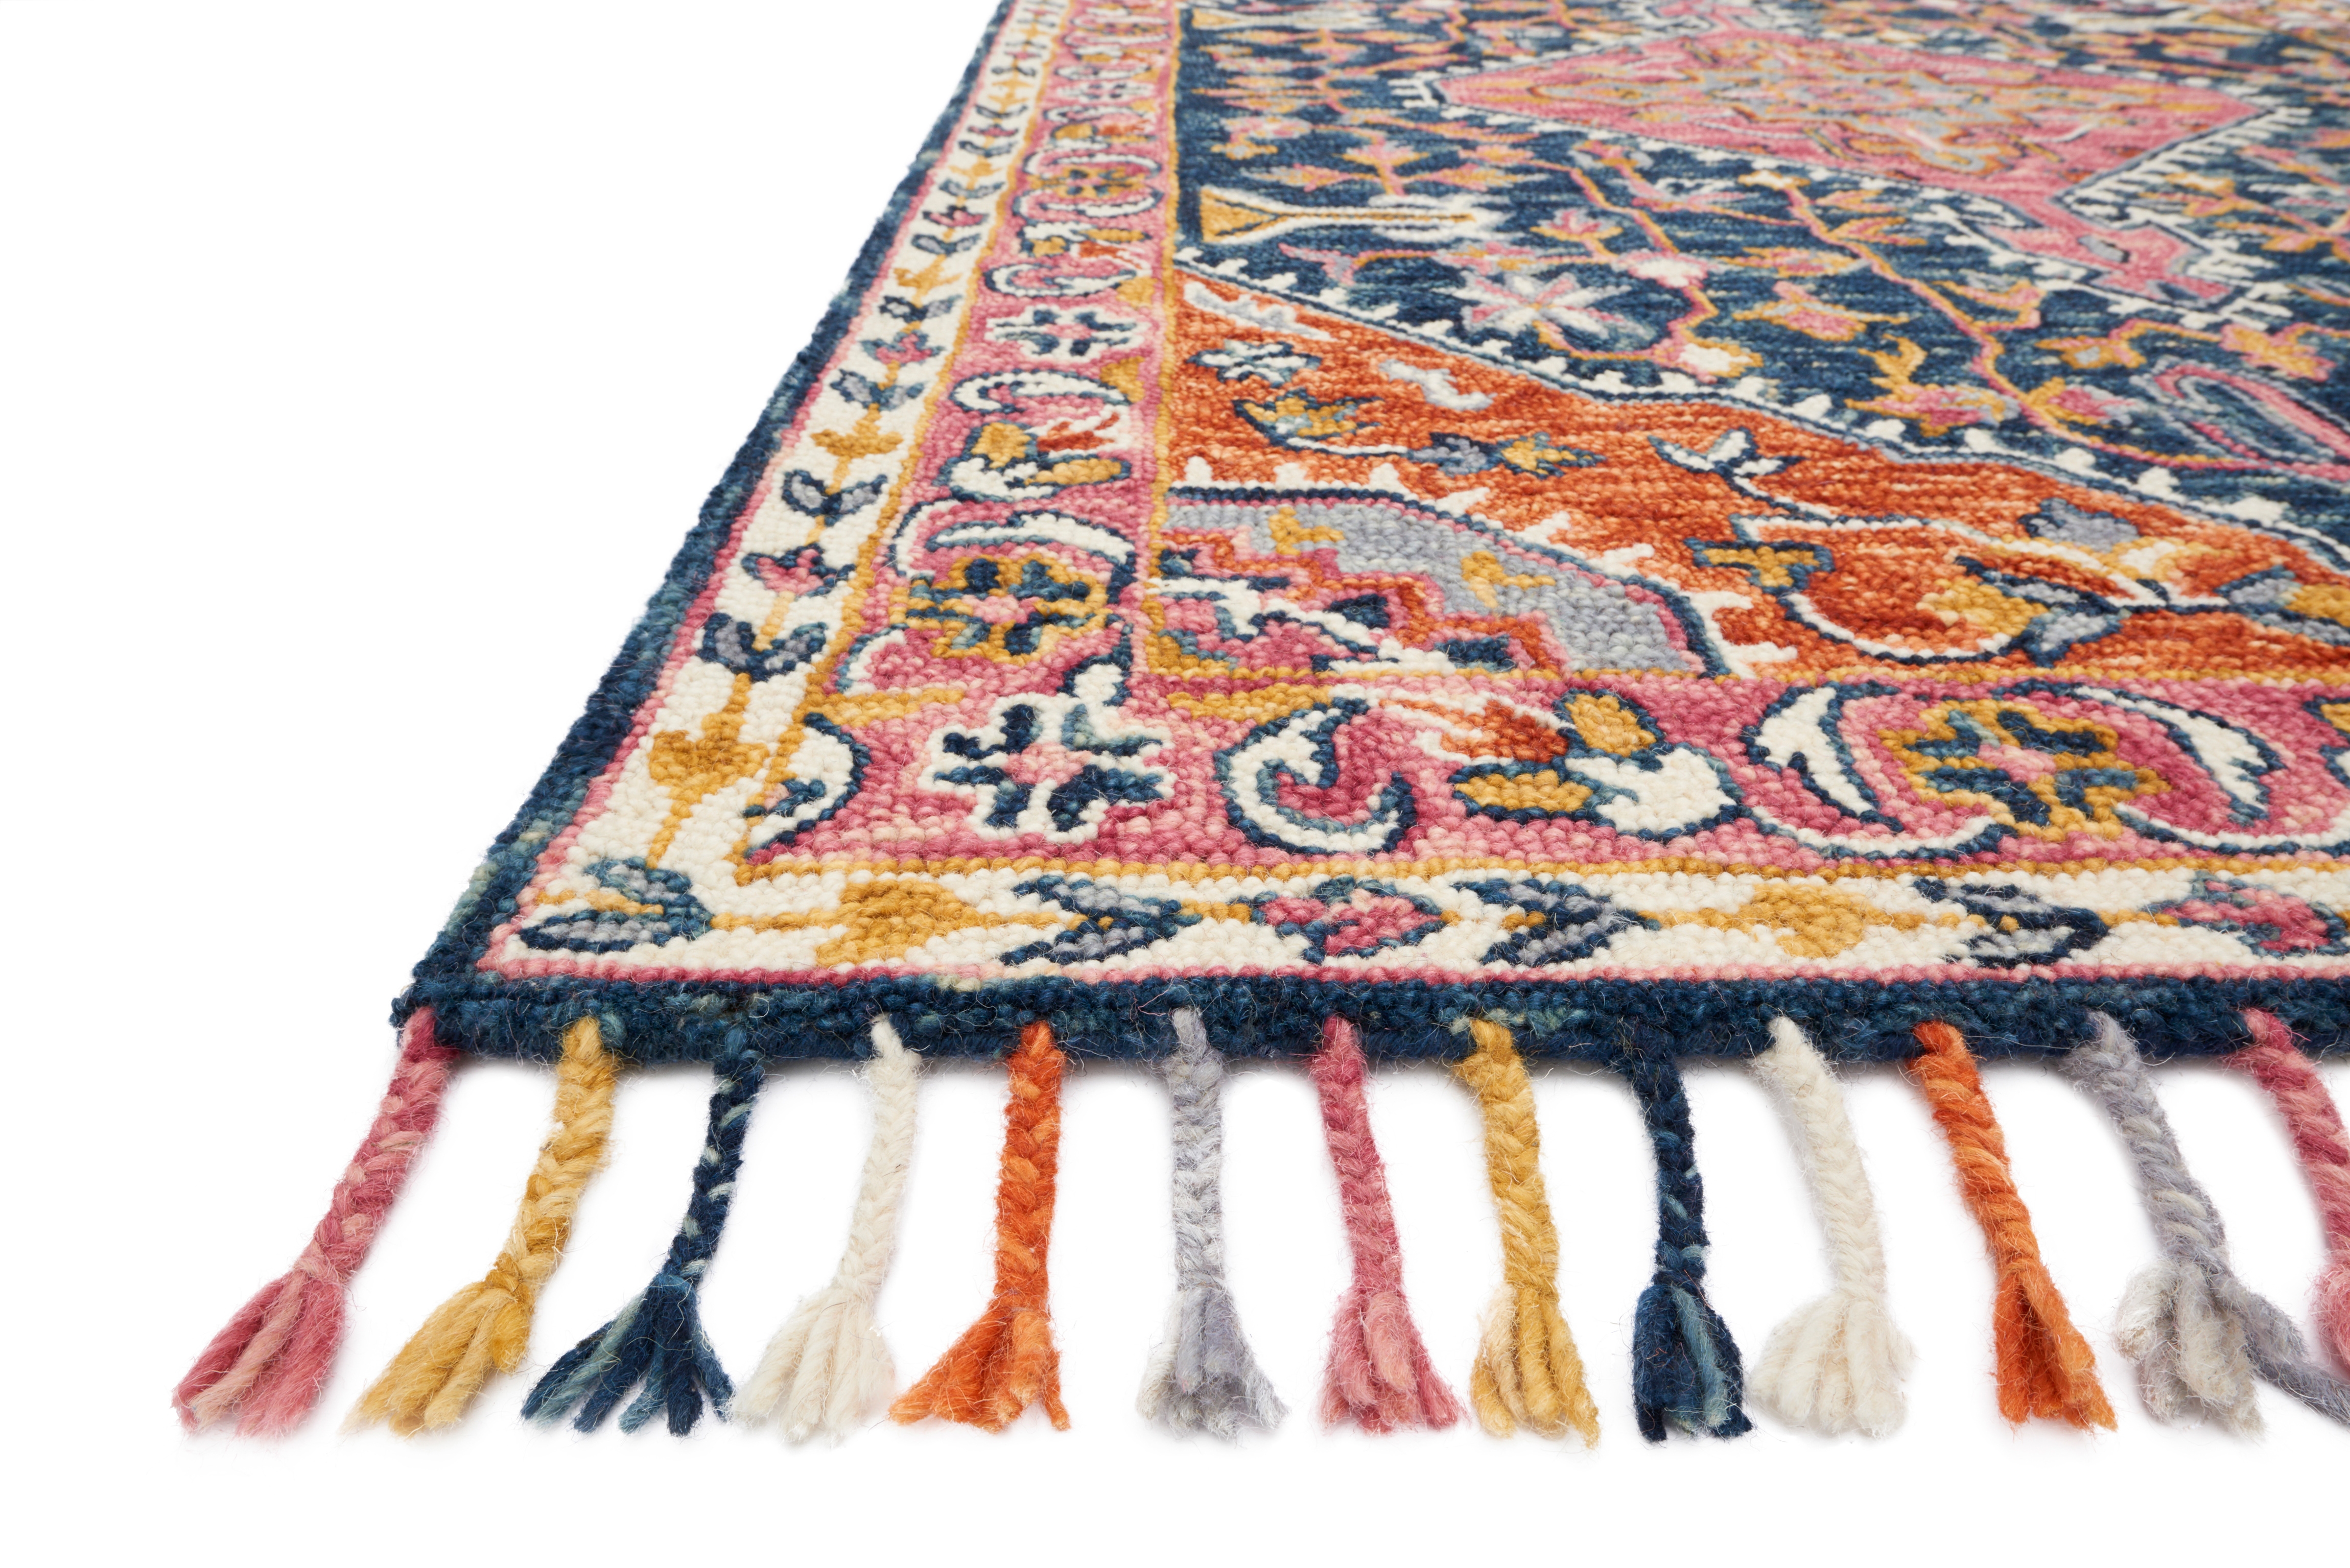 Ede Hand-Knotted Wool Rug - Image 1